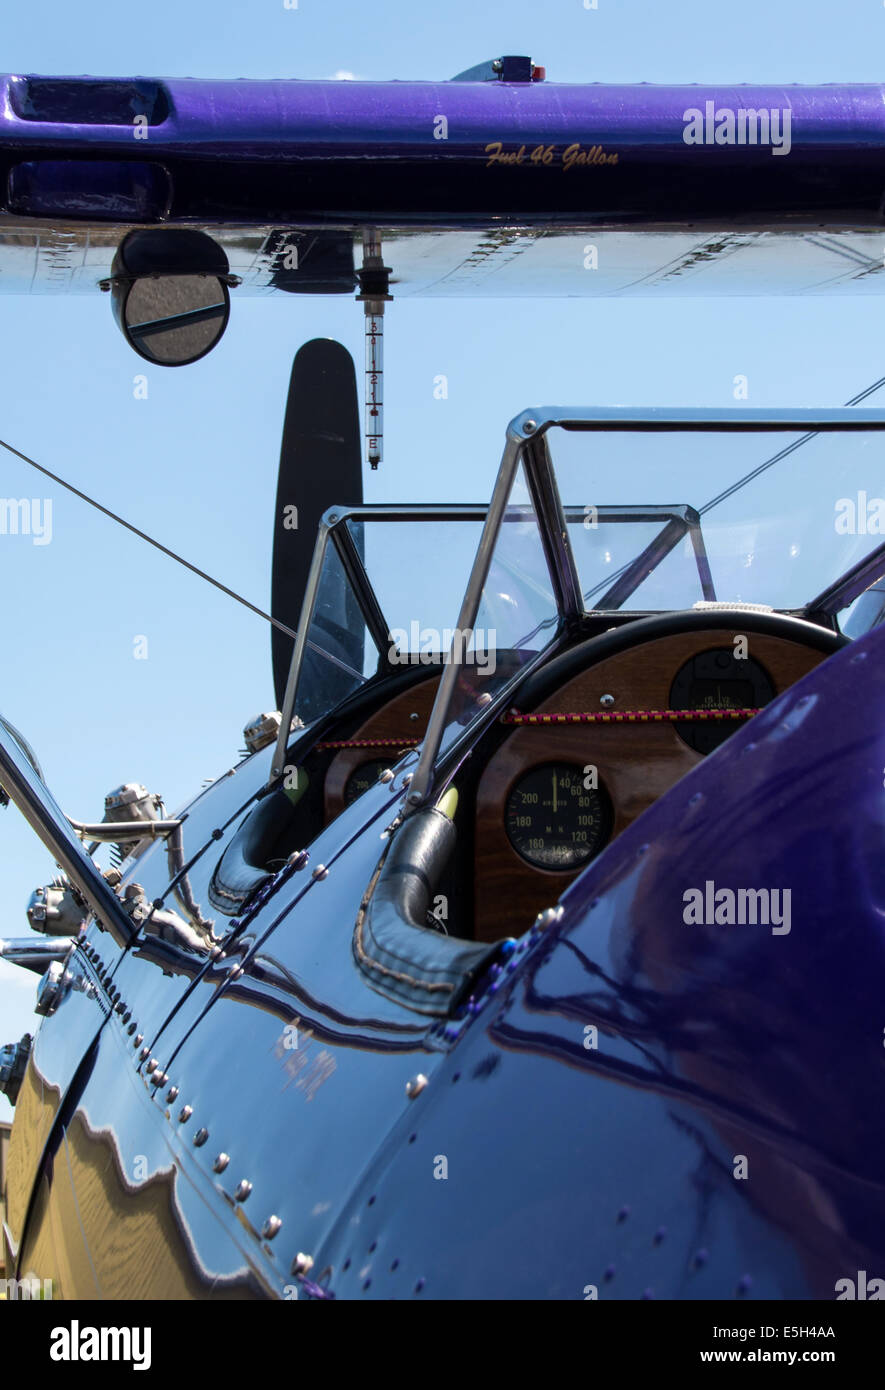 Image of the cockpits and propeller of a classic Stearman. Stock Photo